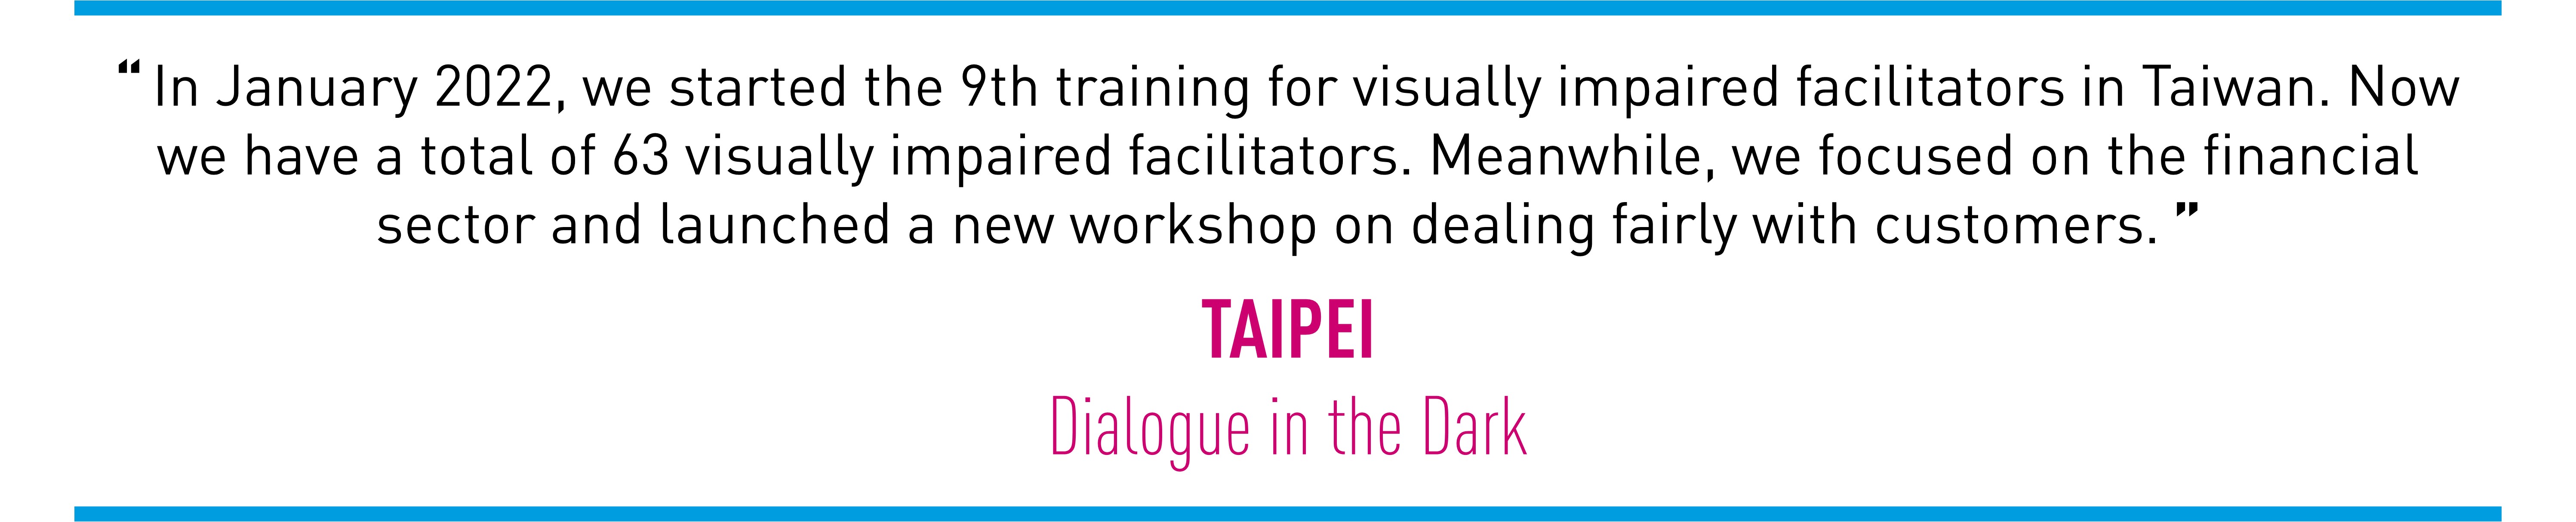 In January 2022, we started the 9th training for visually impaired facilitators in Taiwan. Now we have a total of 63 visually impaired facilitators. Meanwhile, we focused on the financial sector and launched a new workshop on dealing fairly with customers. (TAIPEI Dialogue in the Dark)